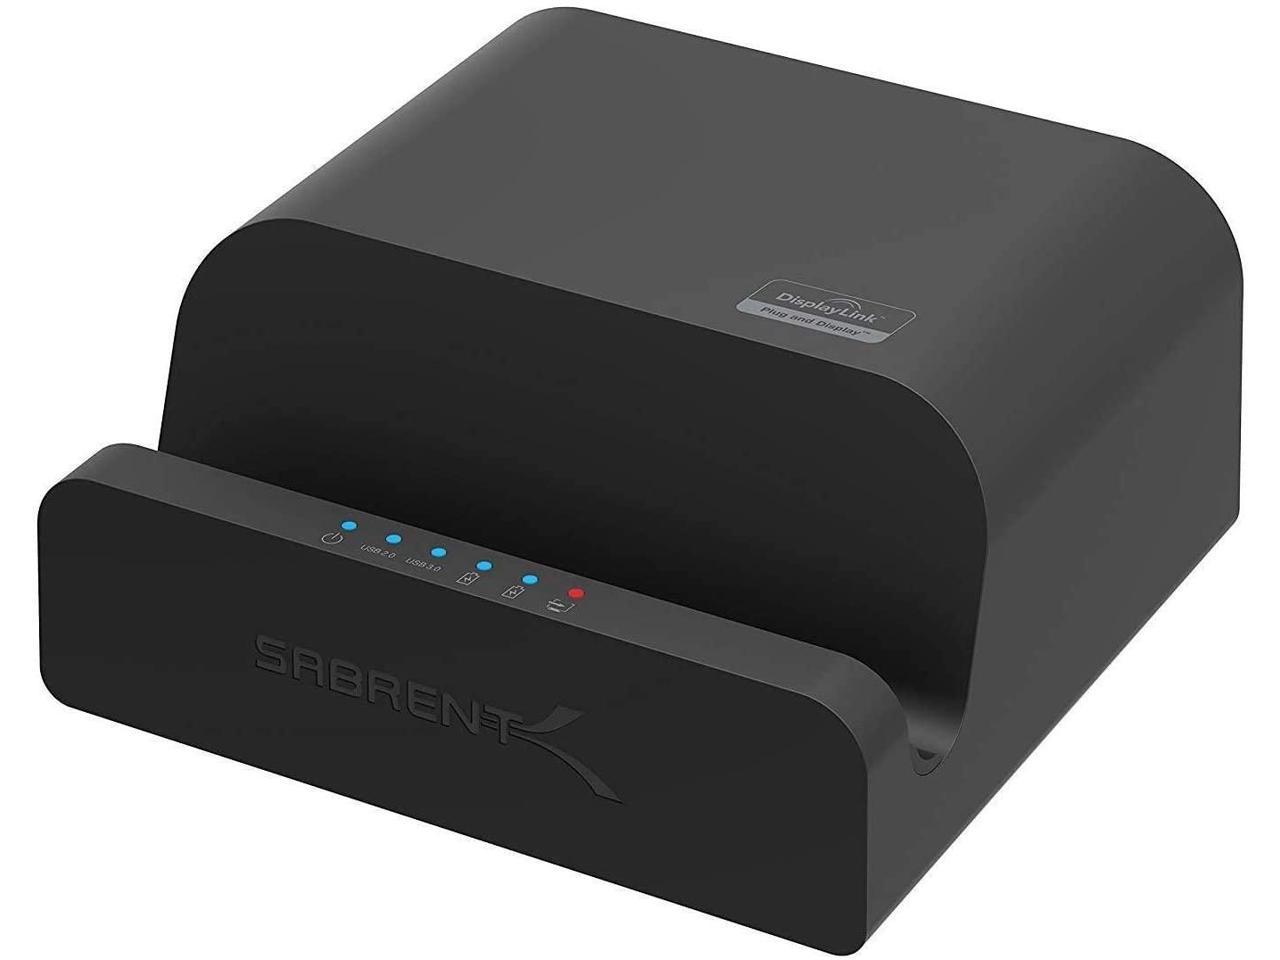 Sabrent USB Type-C Dual 4K Universal Docking Station with USB C Power Delivery DS-WSPD